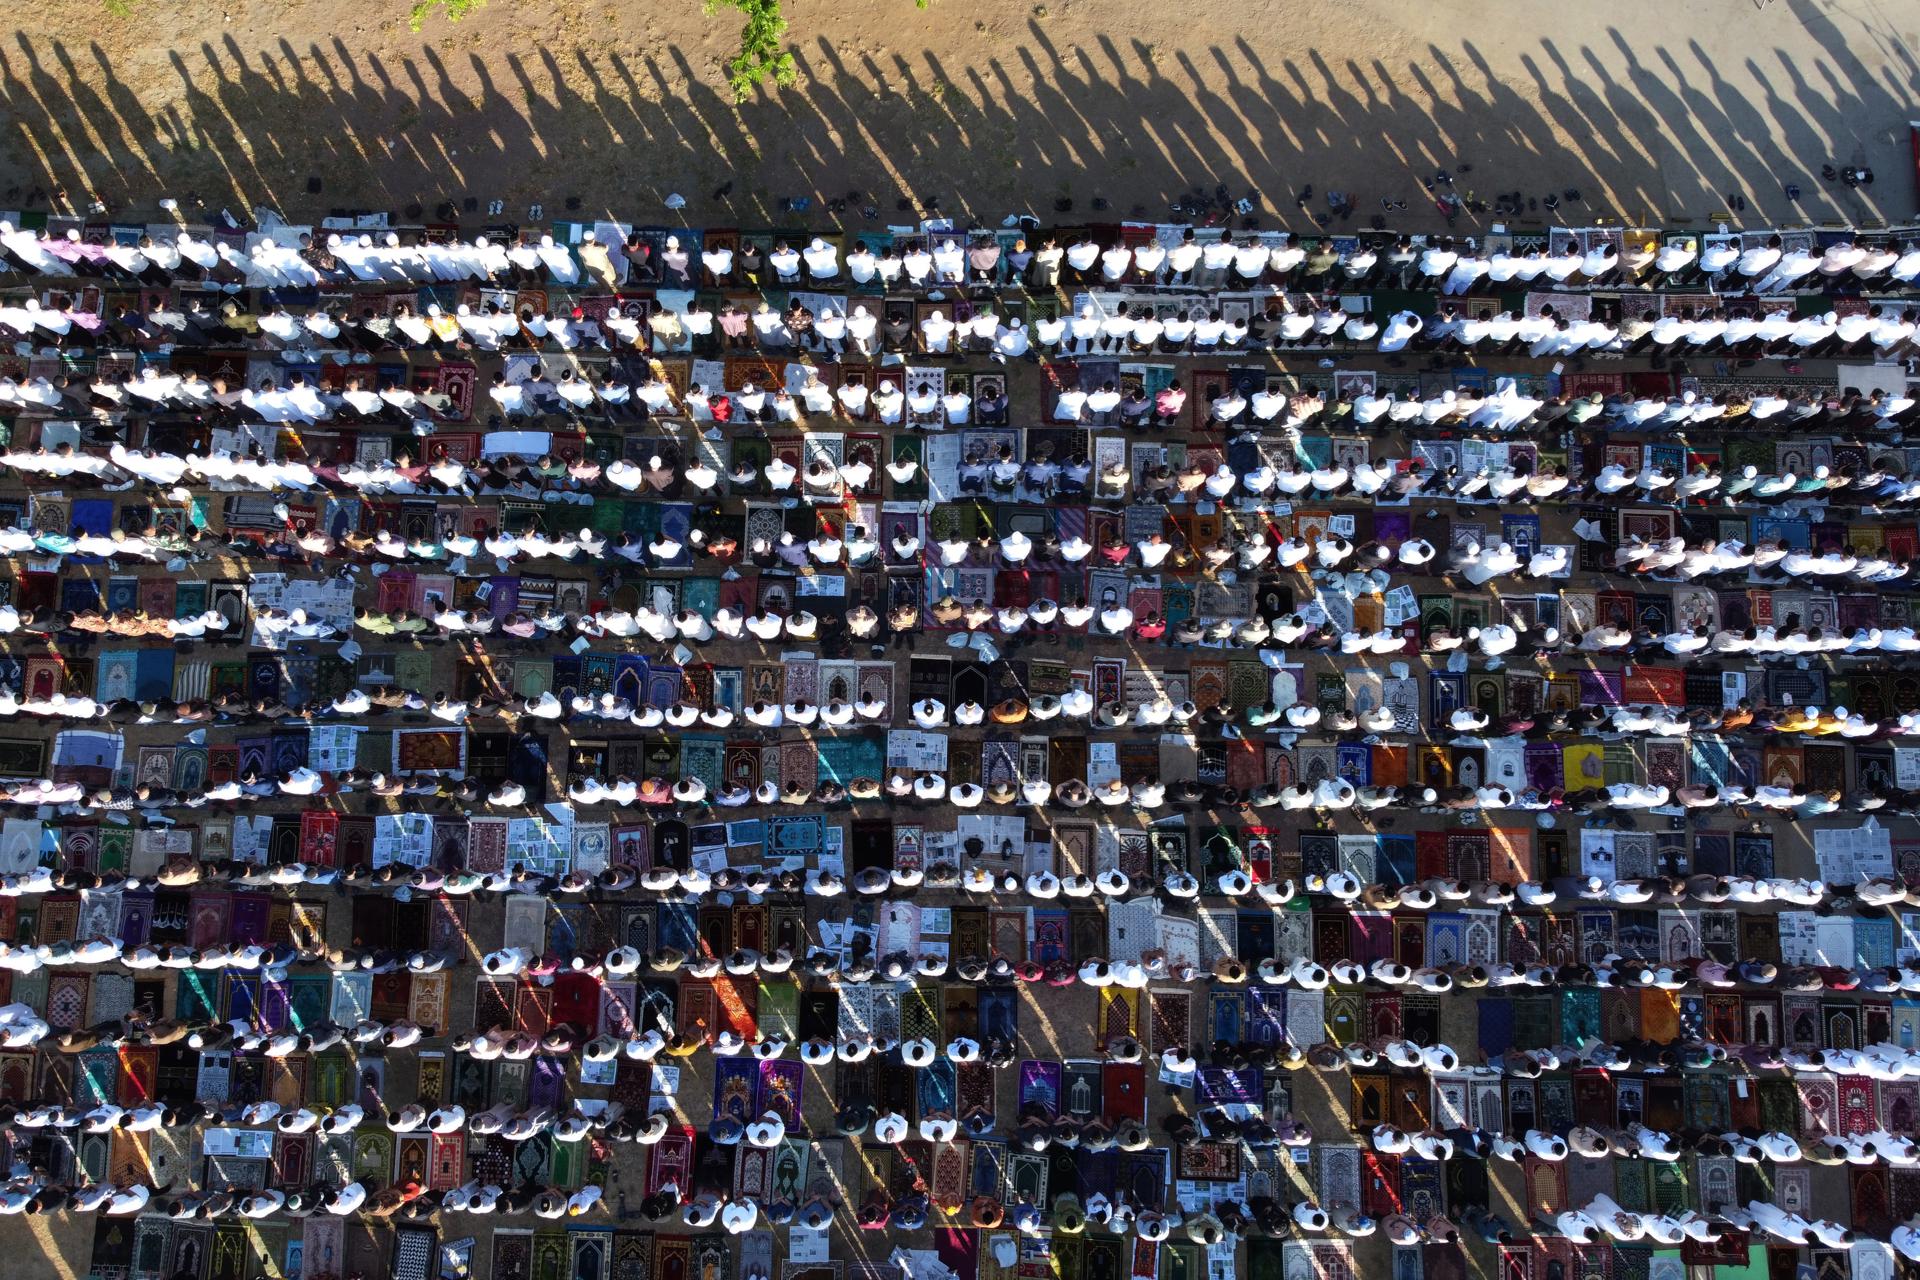 Muslims in Aceh gather for Eid al-Fitr praying, marking the end of the holy month of Ramadan in Banda Aceh, Indonesia, 22 April 2023. EFE-EPA/HOTLI SIMANJUNTAK